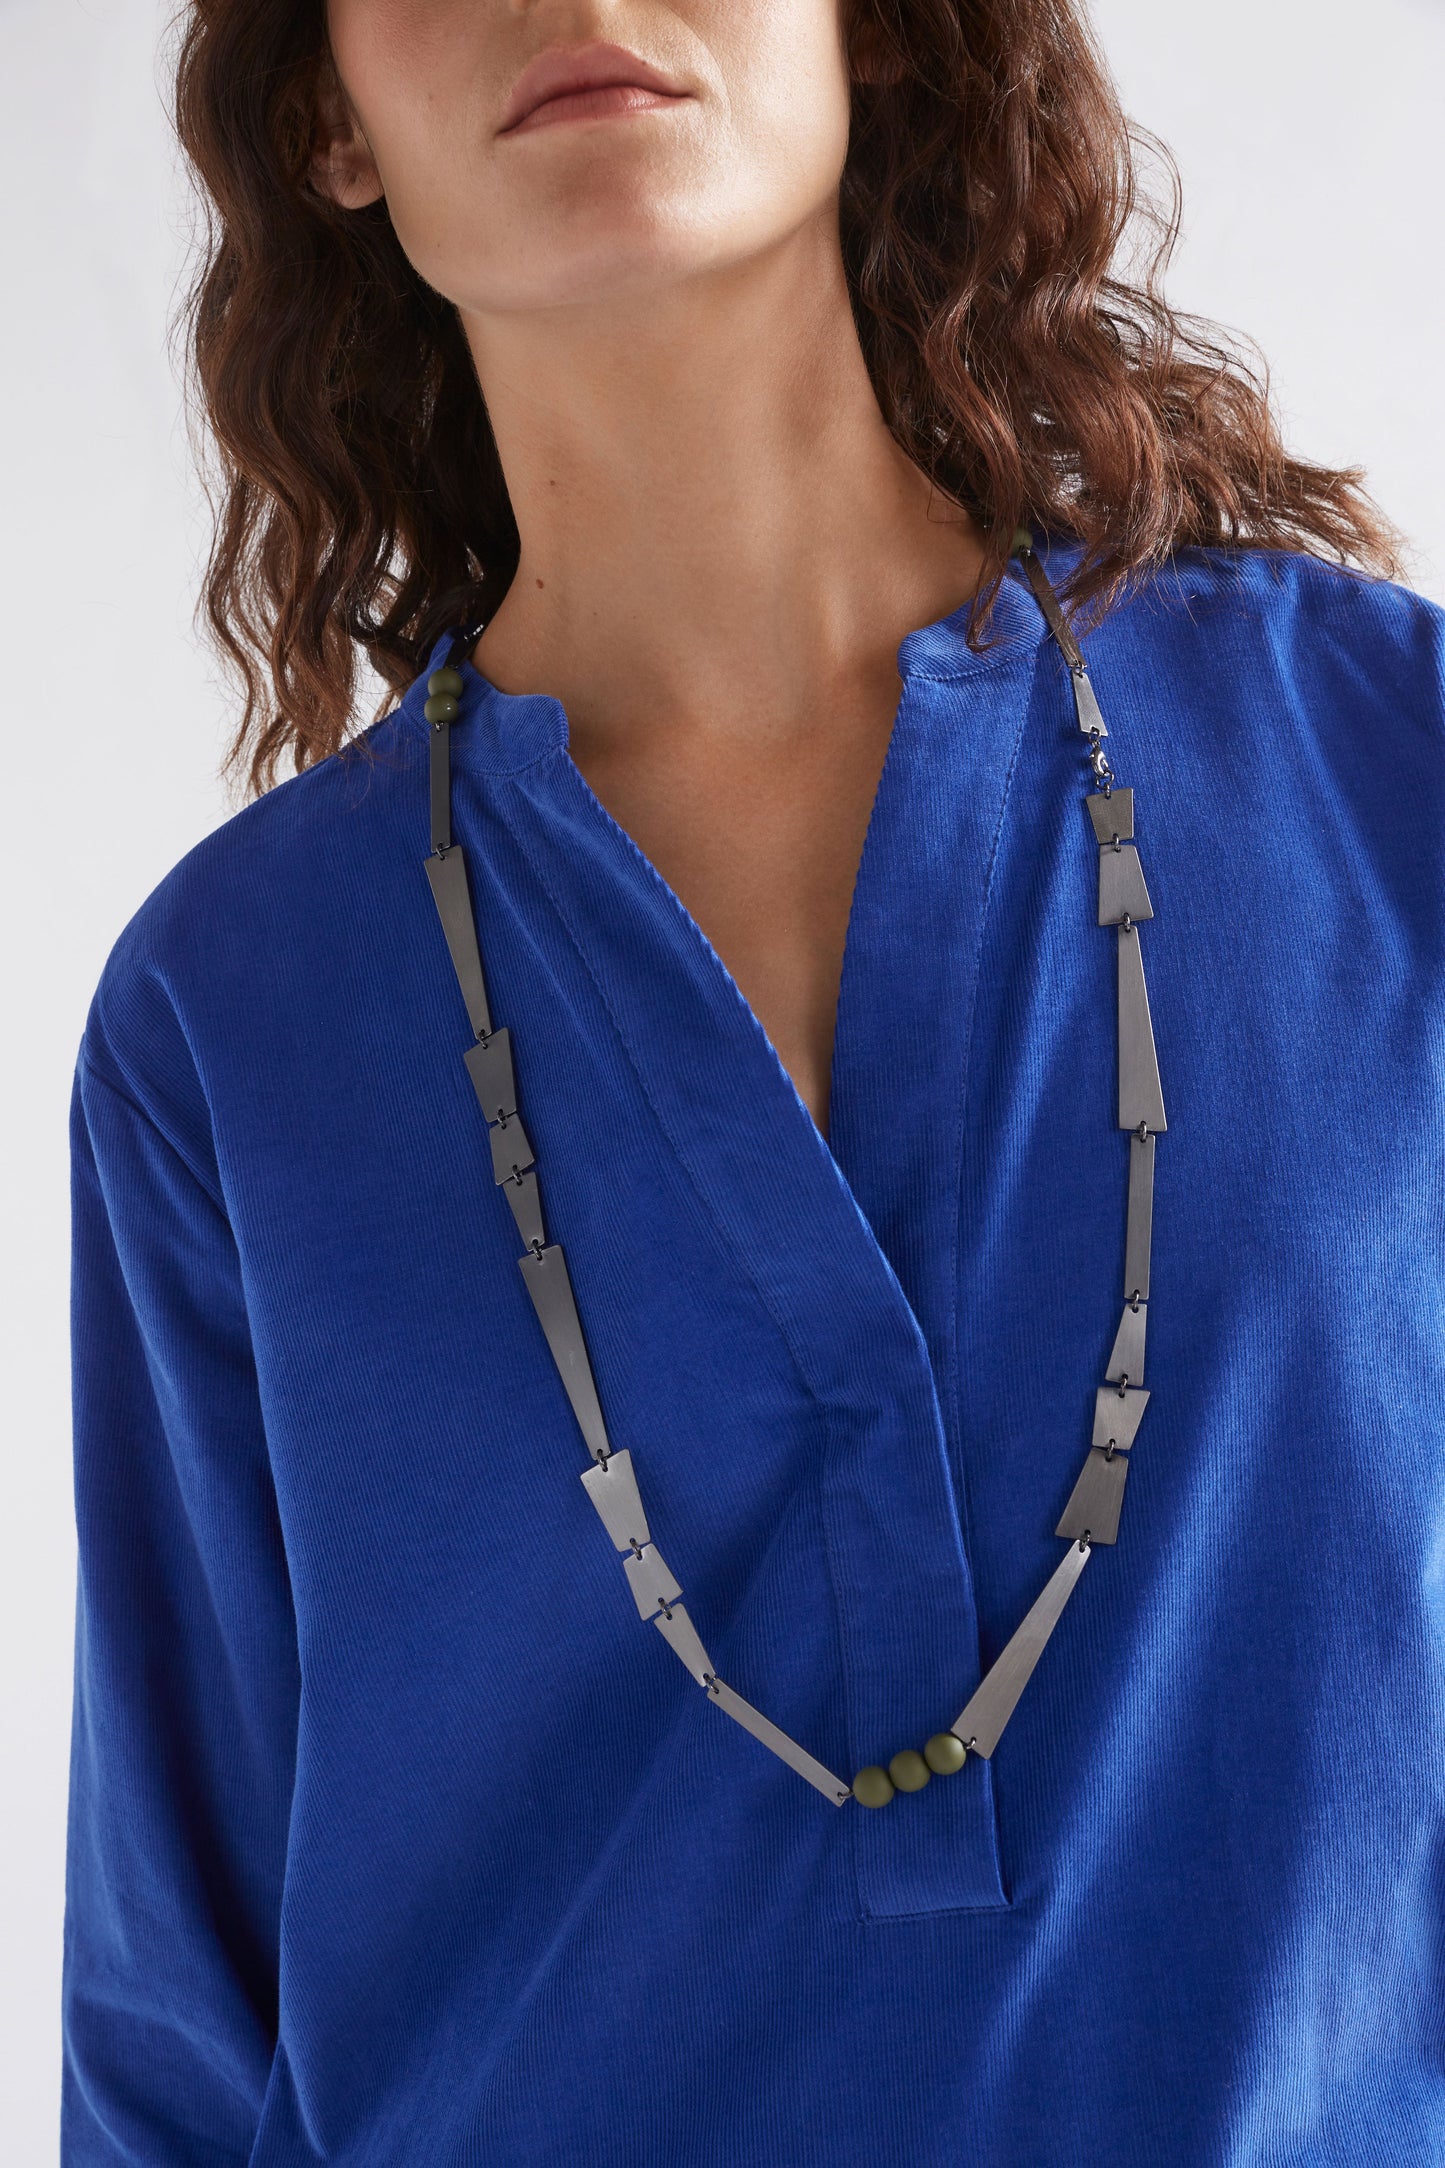 Ator Asymmetric Brushed Metal Plate and Bead Long Necklace | GUNMETAL